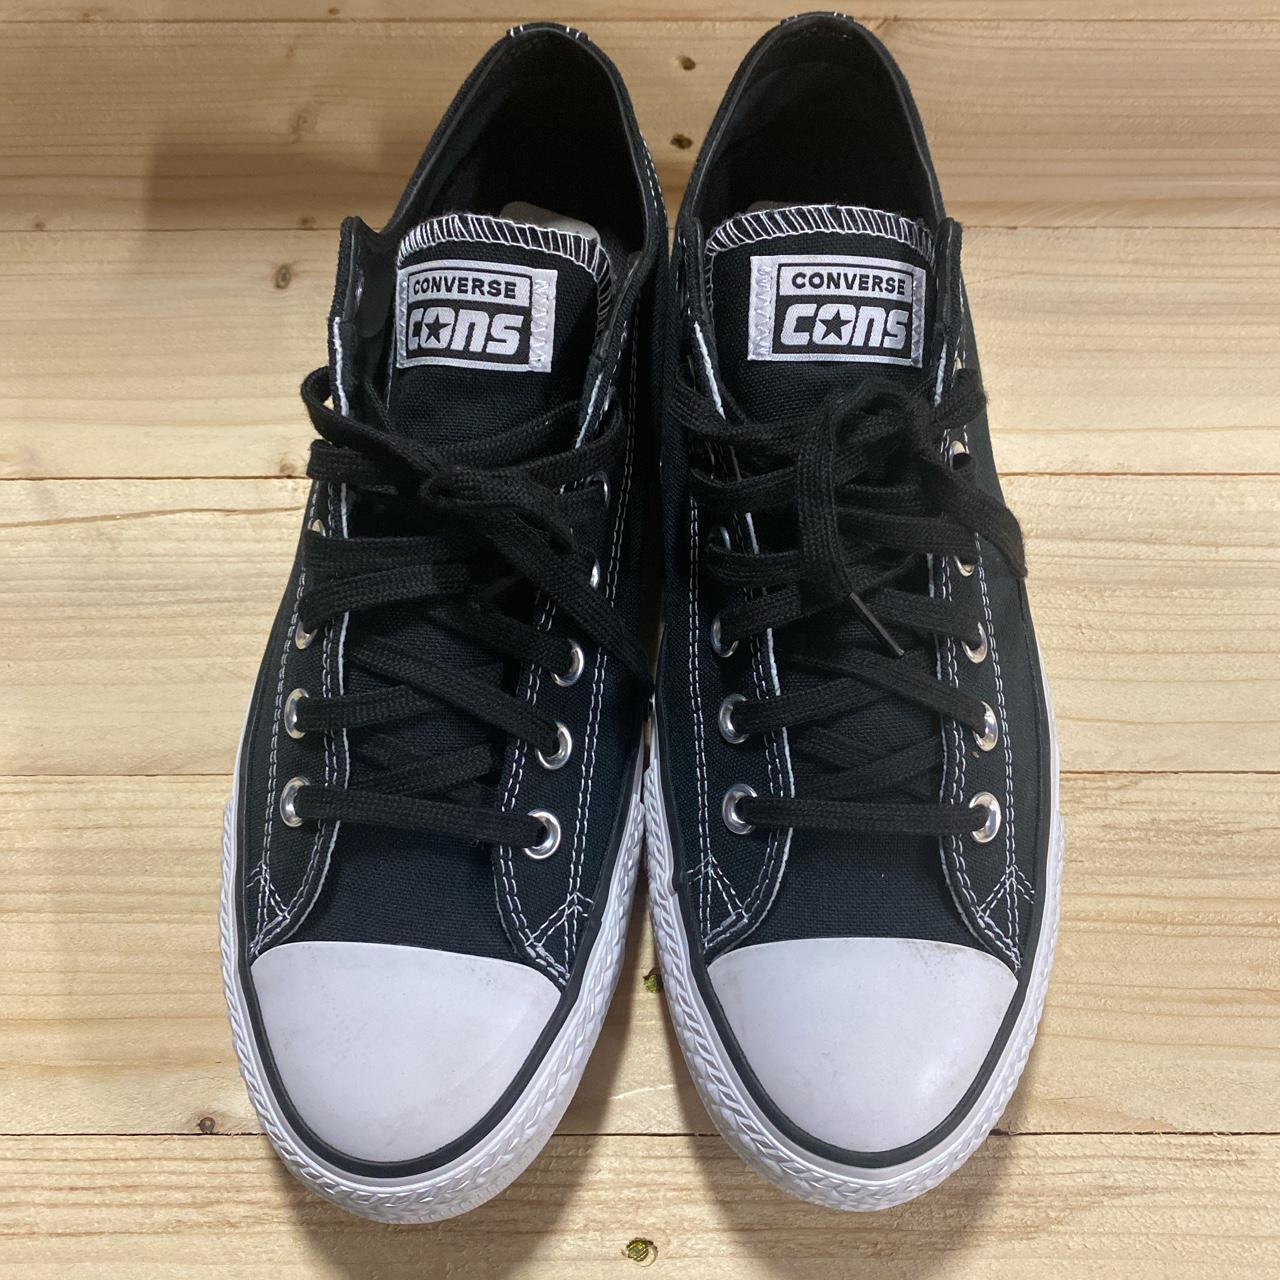 Product Image 3 - Converse cons cts pro
Size 9.5
Pretty